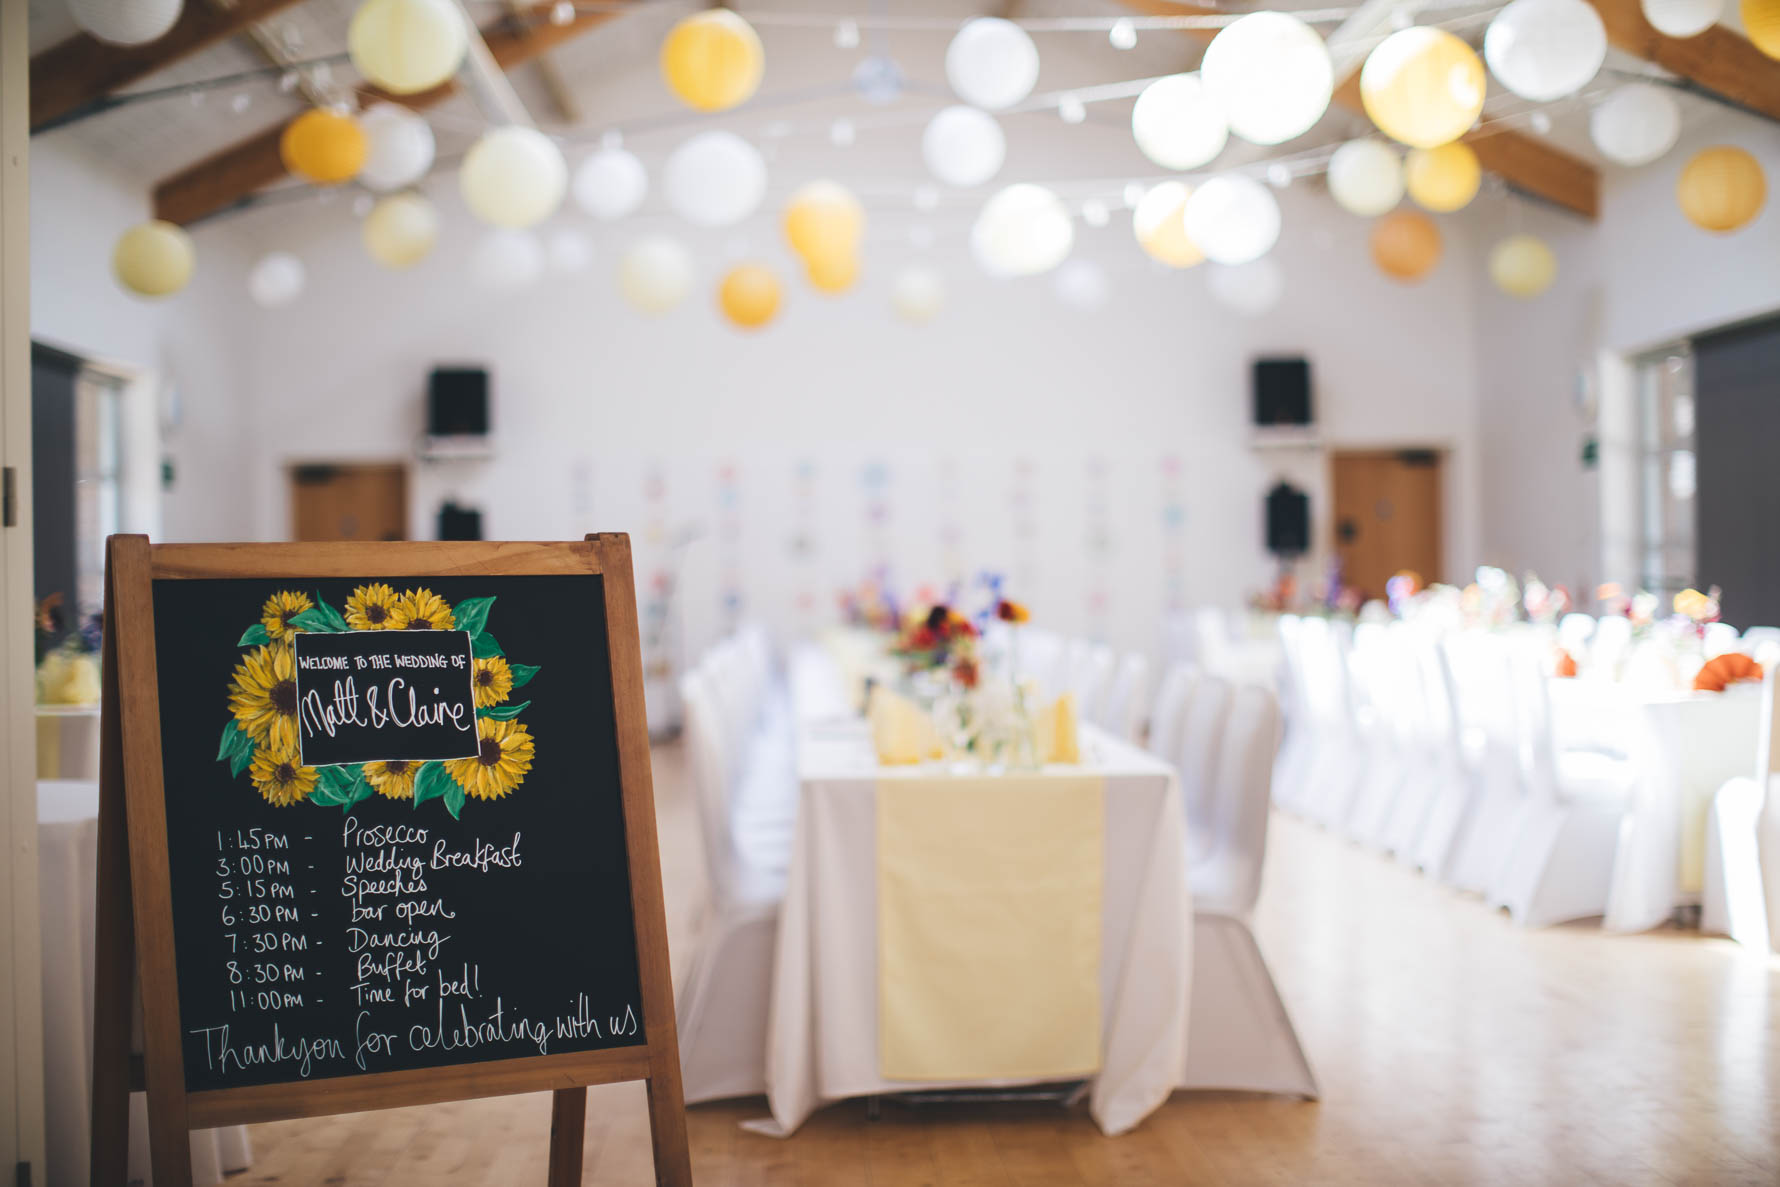 Village hall in Devon decorated for a wedding reception with white chair coverings and long white tables. There are white and yellow paper lanterns hung from the beams across the room and there is a chalkboard with a plan for the day's events in time order